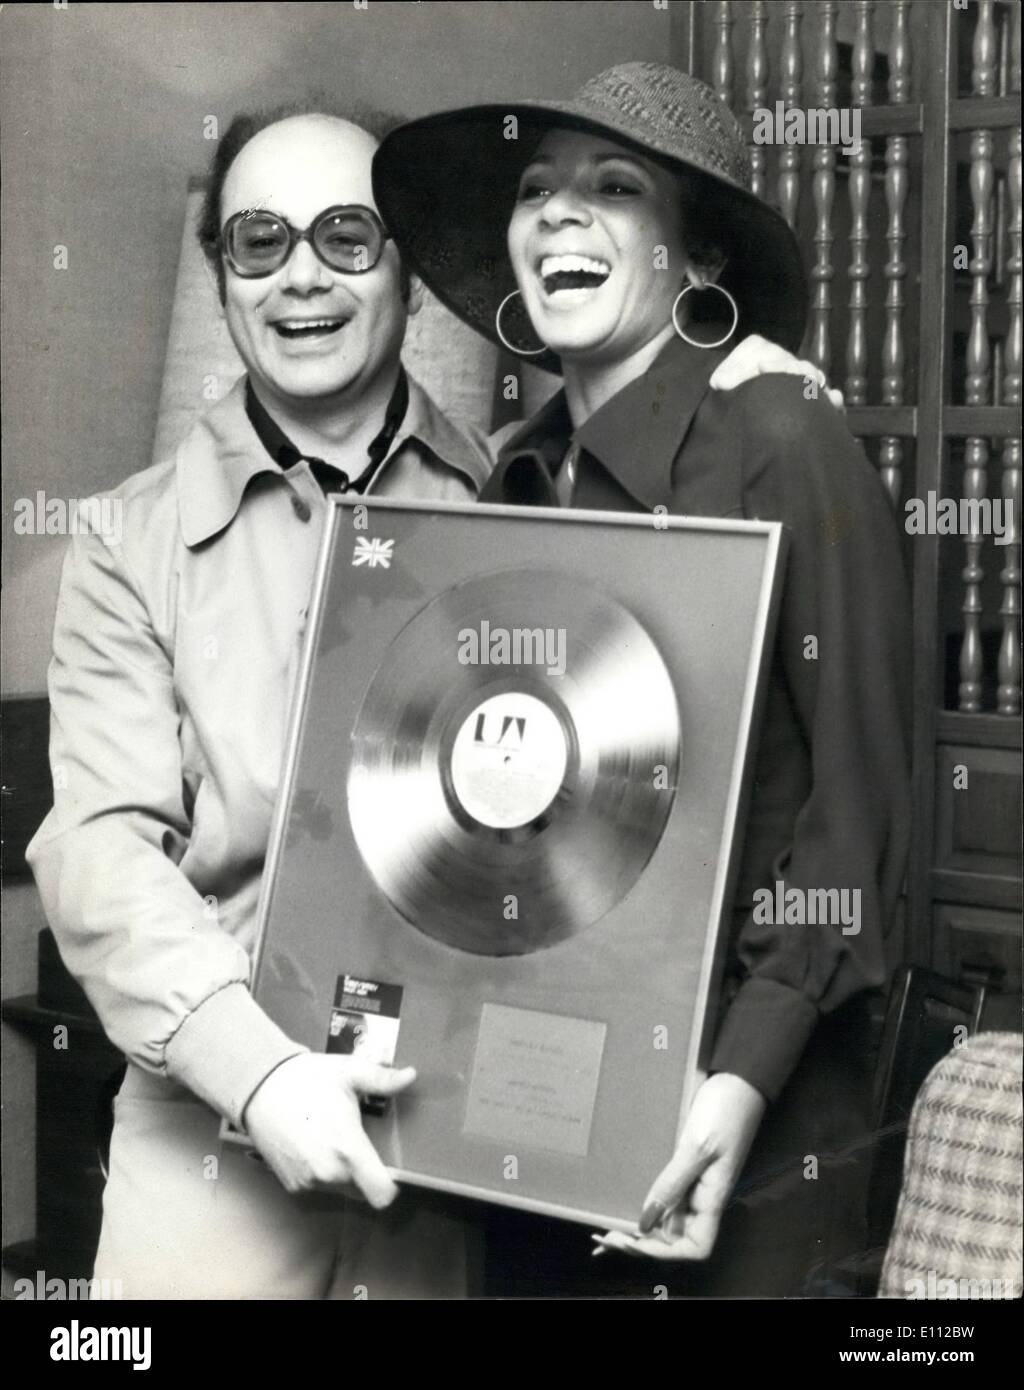 May 05, 1975 - A Gold Disc for Shirley Bassey: Singer Shirley Bassey was today presented with a Gold Disc by Martin Davis, Managing Director of United States Record (UK) for British sales of The Shirley Bassey Singles Album''. Shirley arrived by air at Heathrow Airport where the presentation was made. She will be in U.K. for a short period to record for a new album and her visits coincides with a release of a new United Artists single on May 9th entitled Good, Bad but Beautiful . Photo shows Martin Davis presents a happy Shirley Bassey with her arrival at Heathrow Airport today. Stock Photo